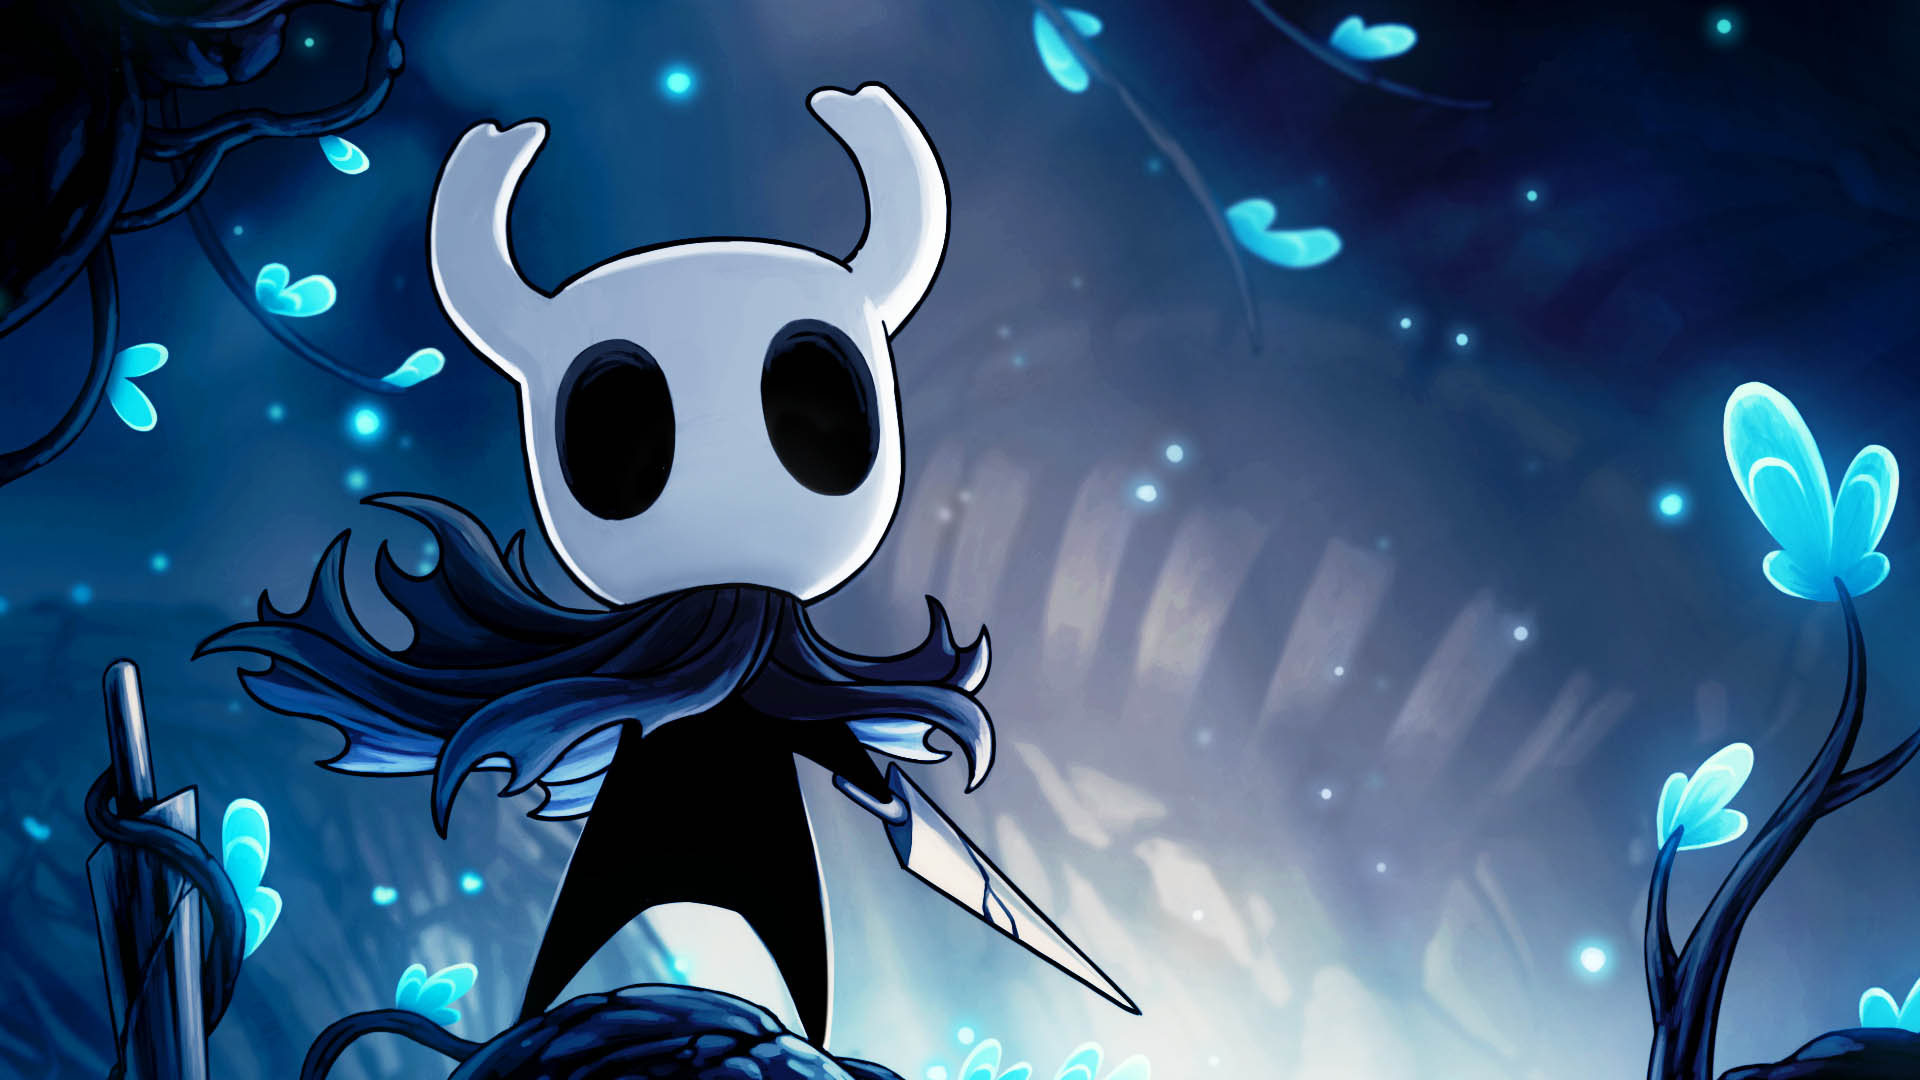 The knight from hollow knight in promo art